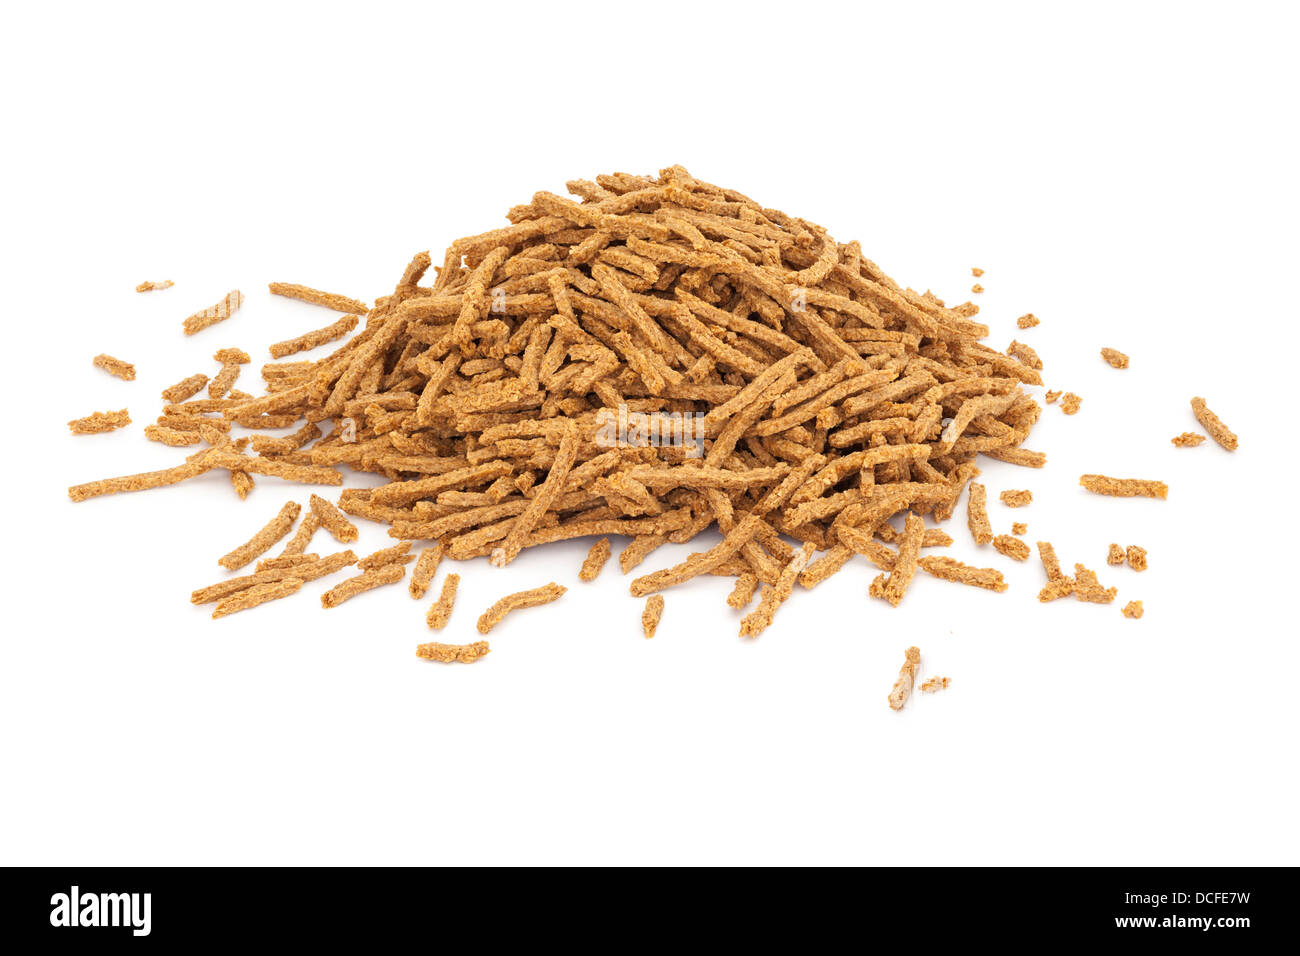 Bran Cereal - a pile oh high fibre bran cereal, isolated on white, front to back focus. Stock Photo